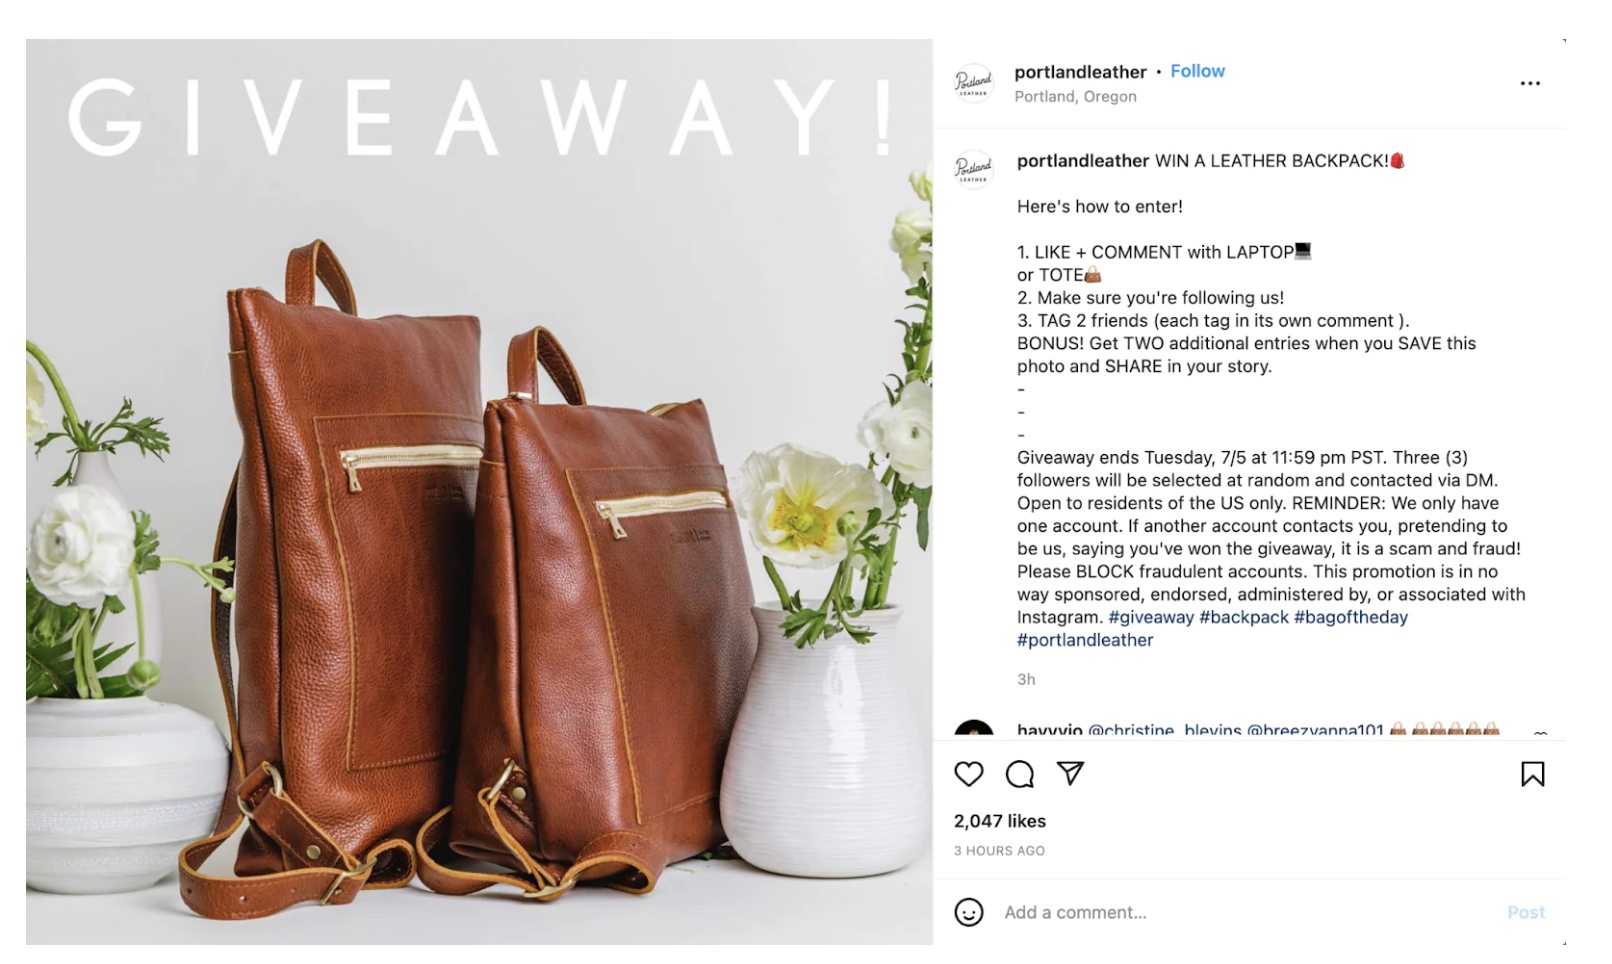 Instagram contests boost organic growth